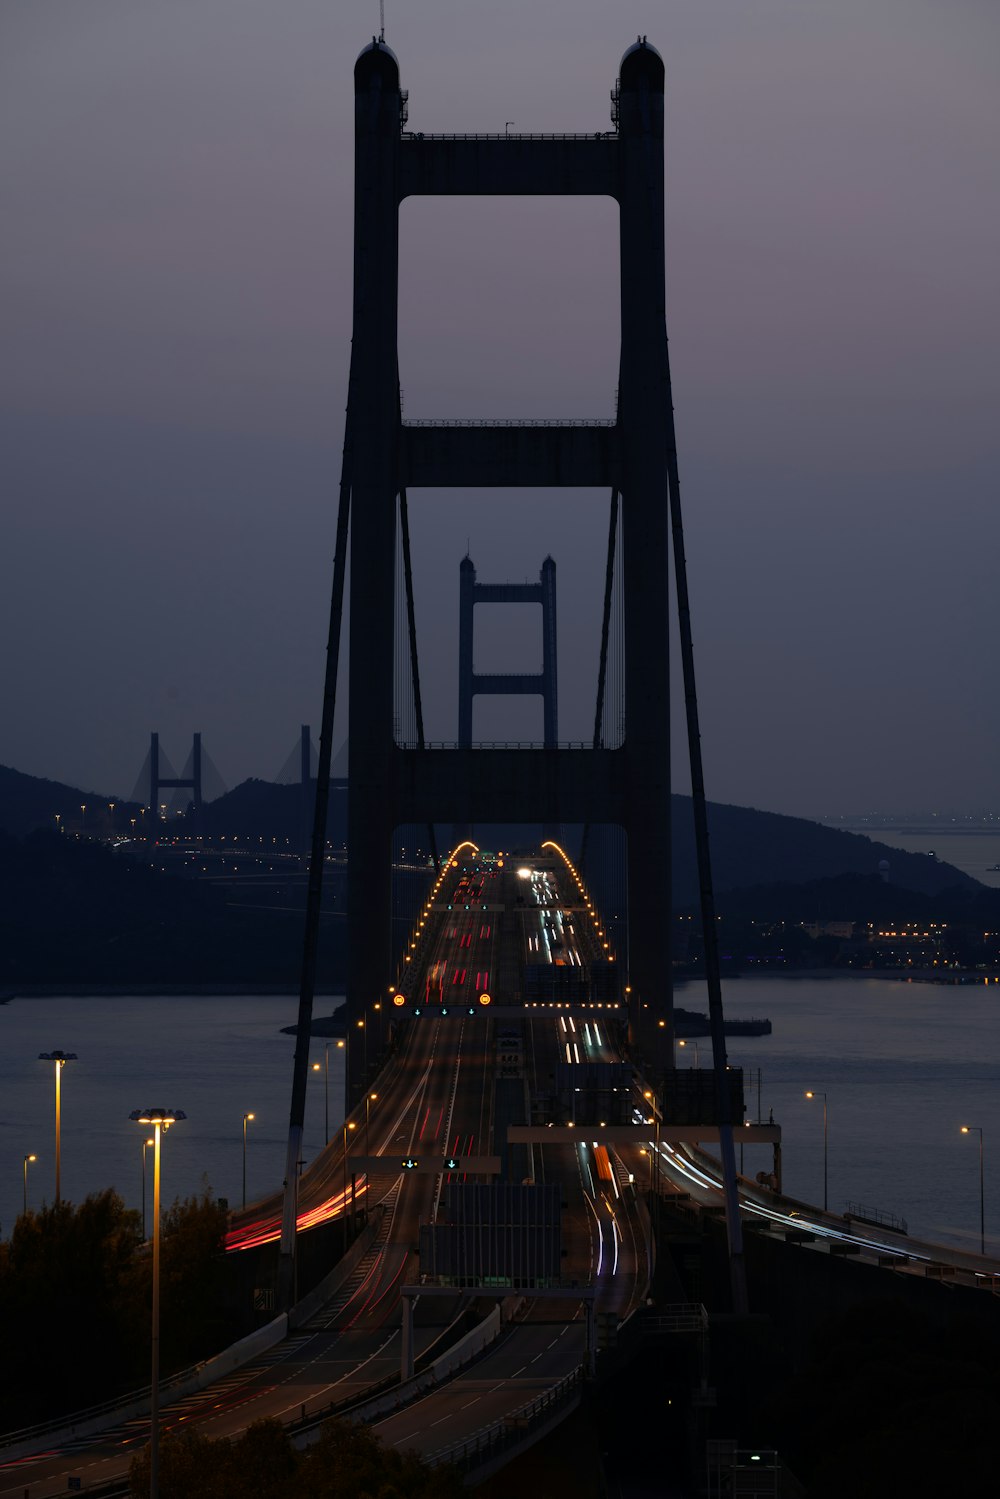 lighted bridge over body of water during night time